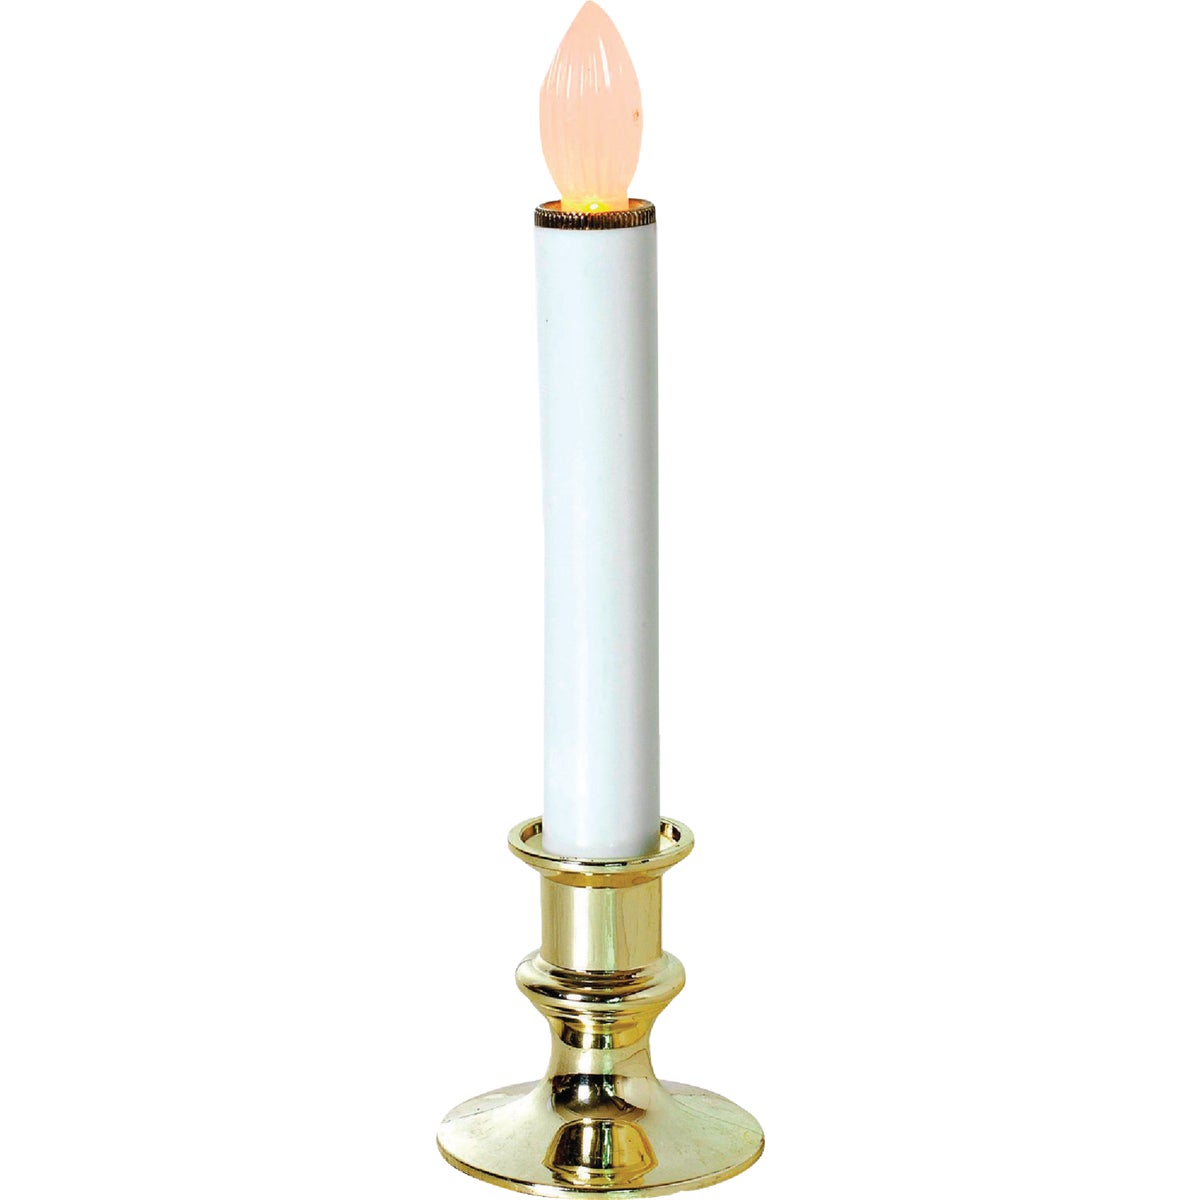 Item 903310, Flickering LED (light emitting diode) candle with a timer will last all 